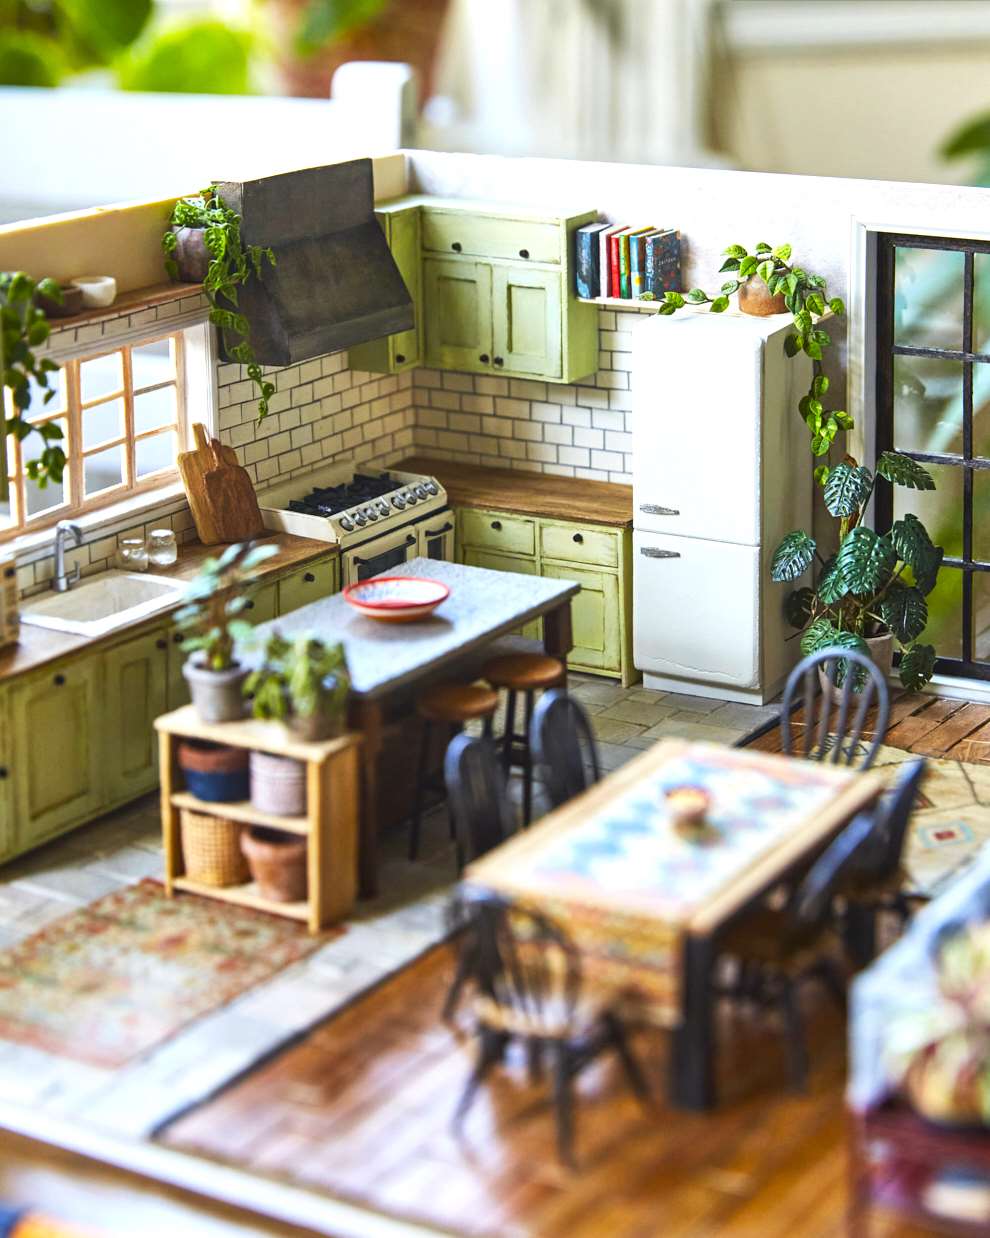 Hannah Lemon, Miniature detailed set design. Warm kitchen with a wooden table surrounded by houseplants and botanicals. Tiny sculpture made from air drying clay, paper, wood, paint, mixed media.